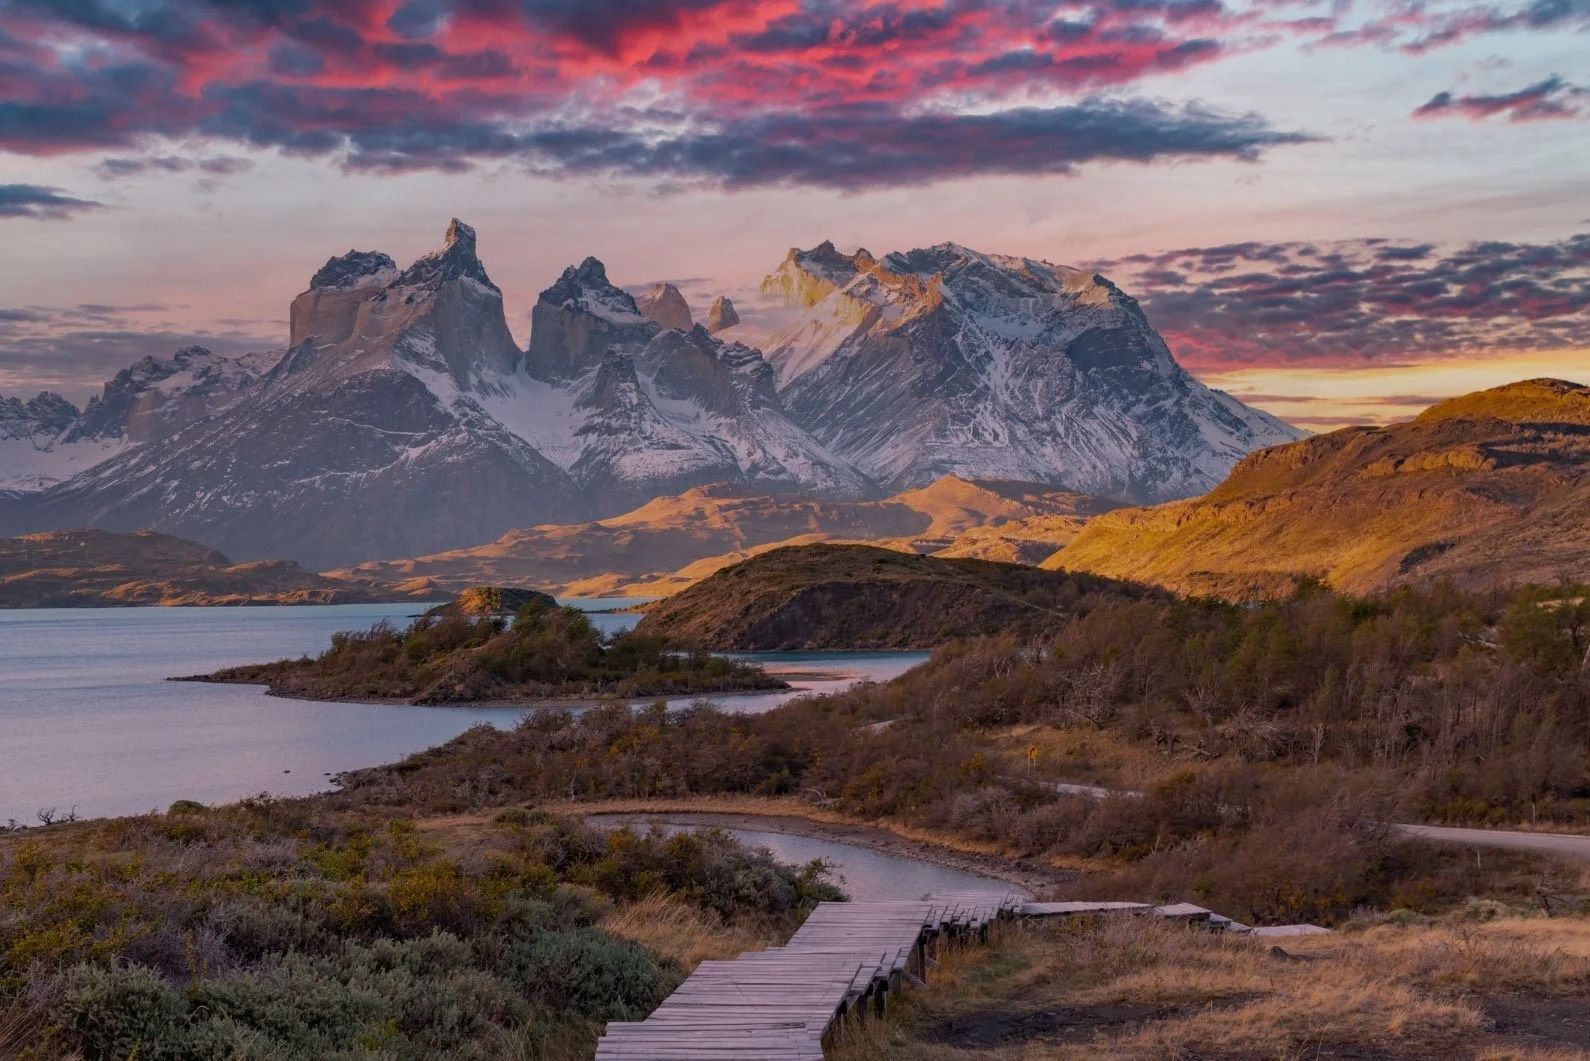 A boardwalk winding down through Patagonia, with stunning views of the Torres del Paine mountains.